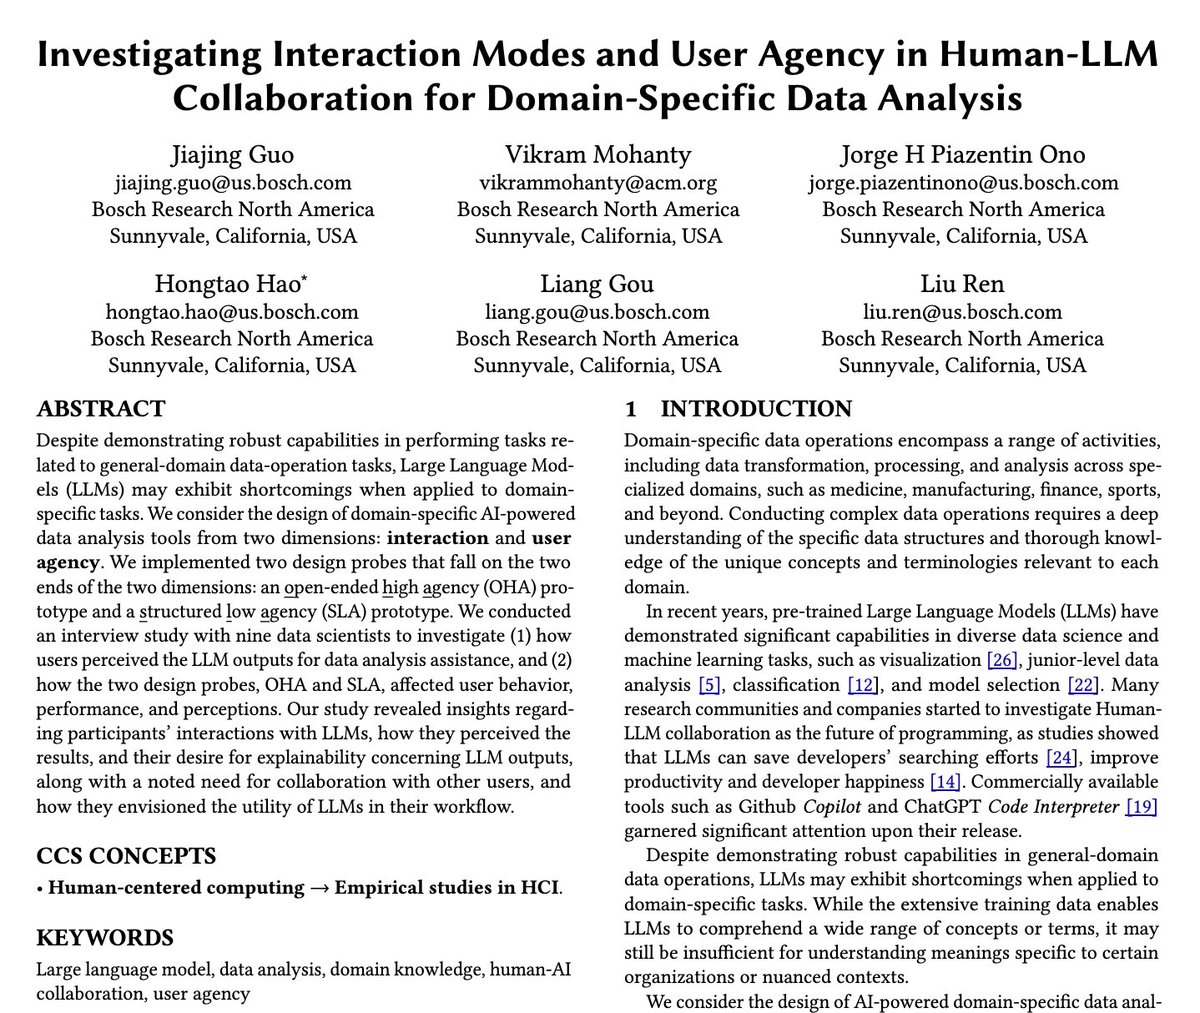 Come check our #CHI2024 late-breaking work on designing LLM-powered tools for domain-specific data analysis! @jiajing_guo & I explored user perceptions of diff. design dimensions (i.e., user agency, structured v/s open-ended interaction) in these tools! dl.acm.org/doi/10.1145/36…